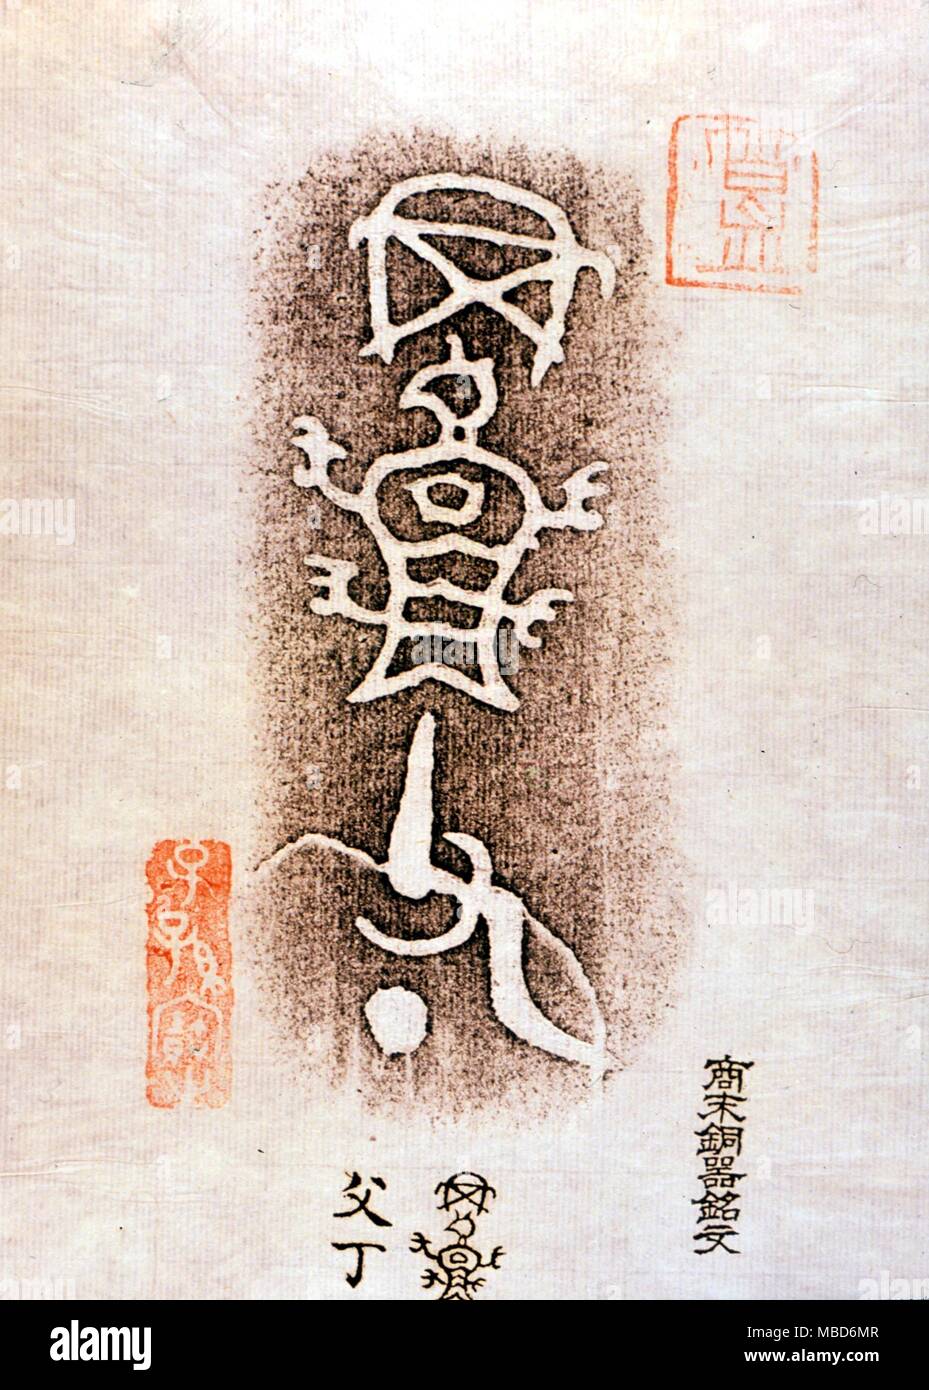 SYMBOLS - ALPHABETS - Early pictographs which gave rise to the Chinese characters. Rubbing of incised design on a bronze utensil of prehistoric origin. Stock Photo